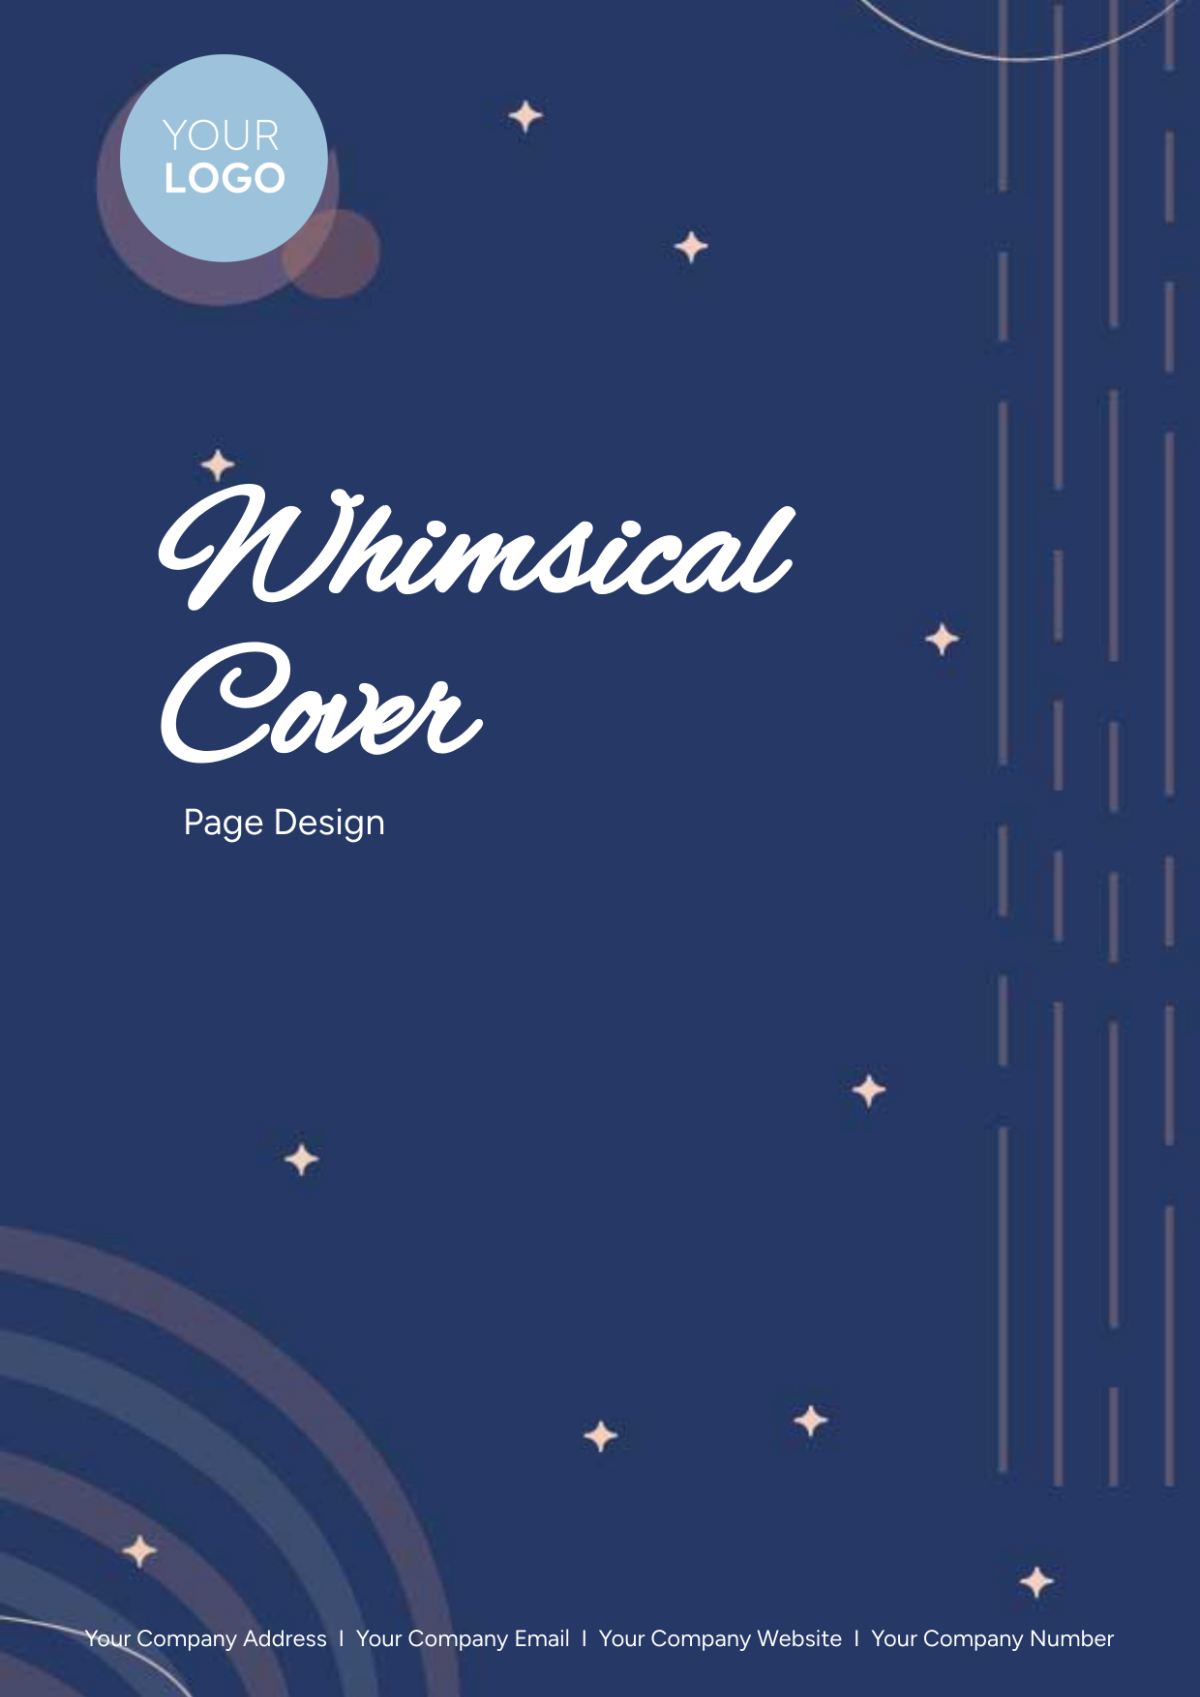 Whimsical Cover Page Design